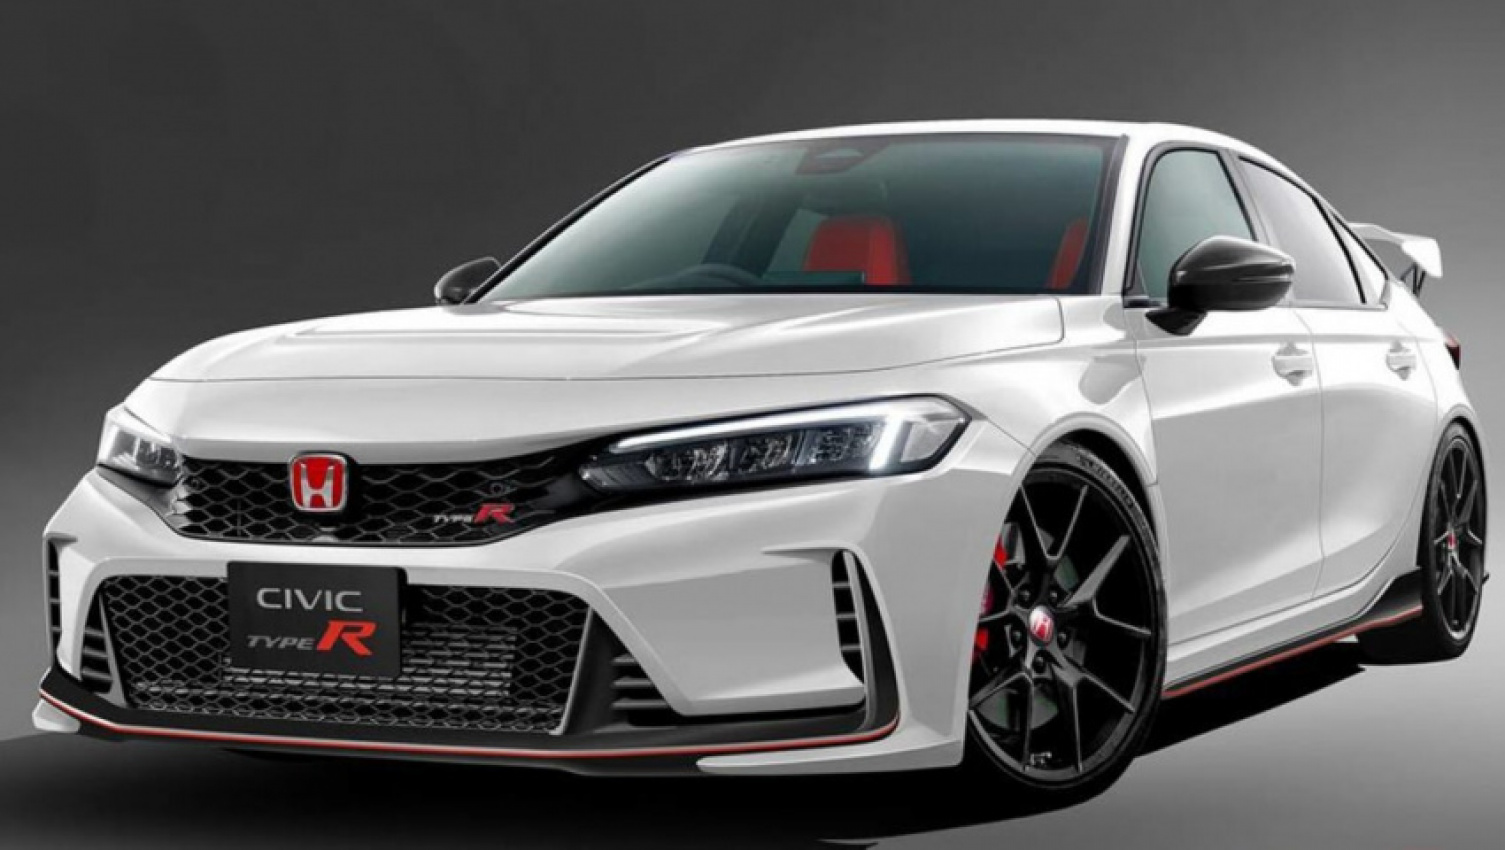 autos, cars, ford, honda, hyundai, volkswagen, ford focus, hatchback, honda civic, honda civic 2022, honda hatchback range, honda news, industry news, showroom news, 2023 honda civic type r might get automatic transmission option! new hyundai i30 n, volkswagen golf gti and ford focus st rival to offer two pedals: report